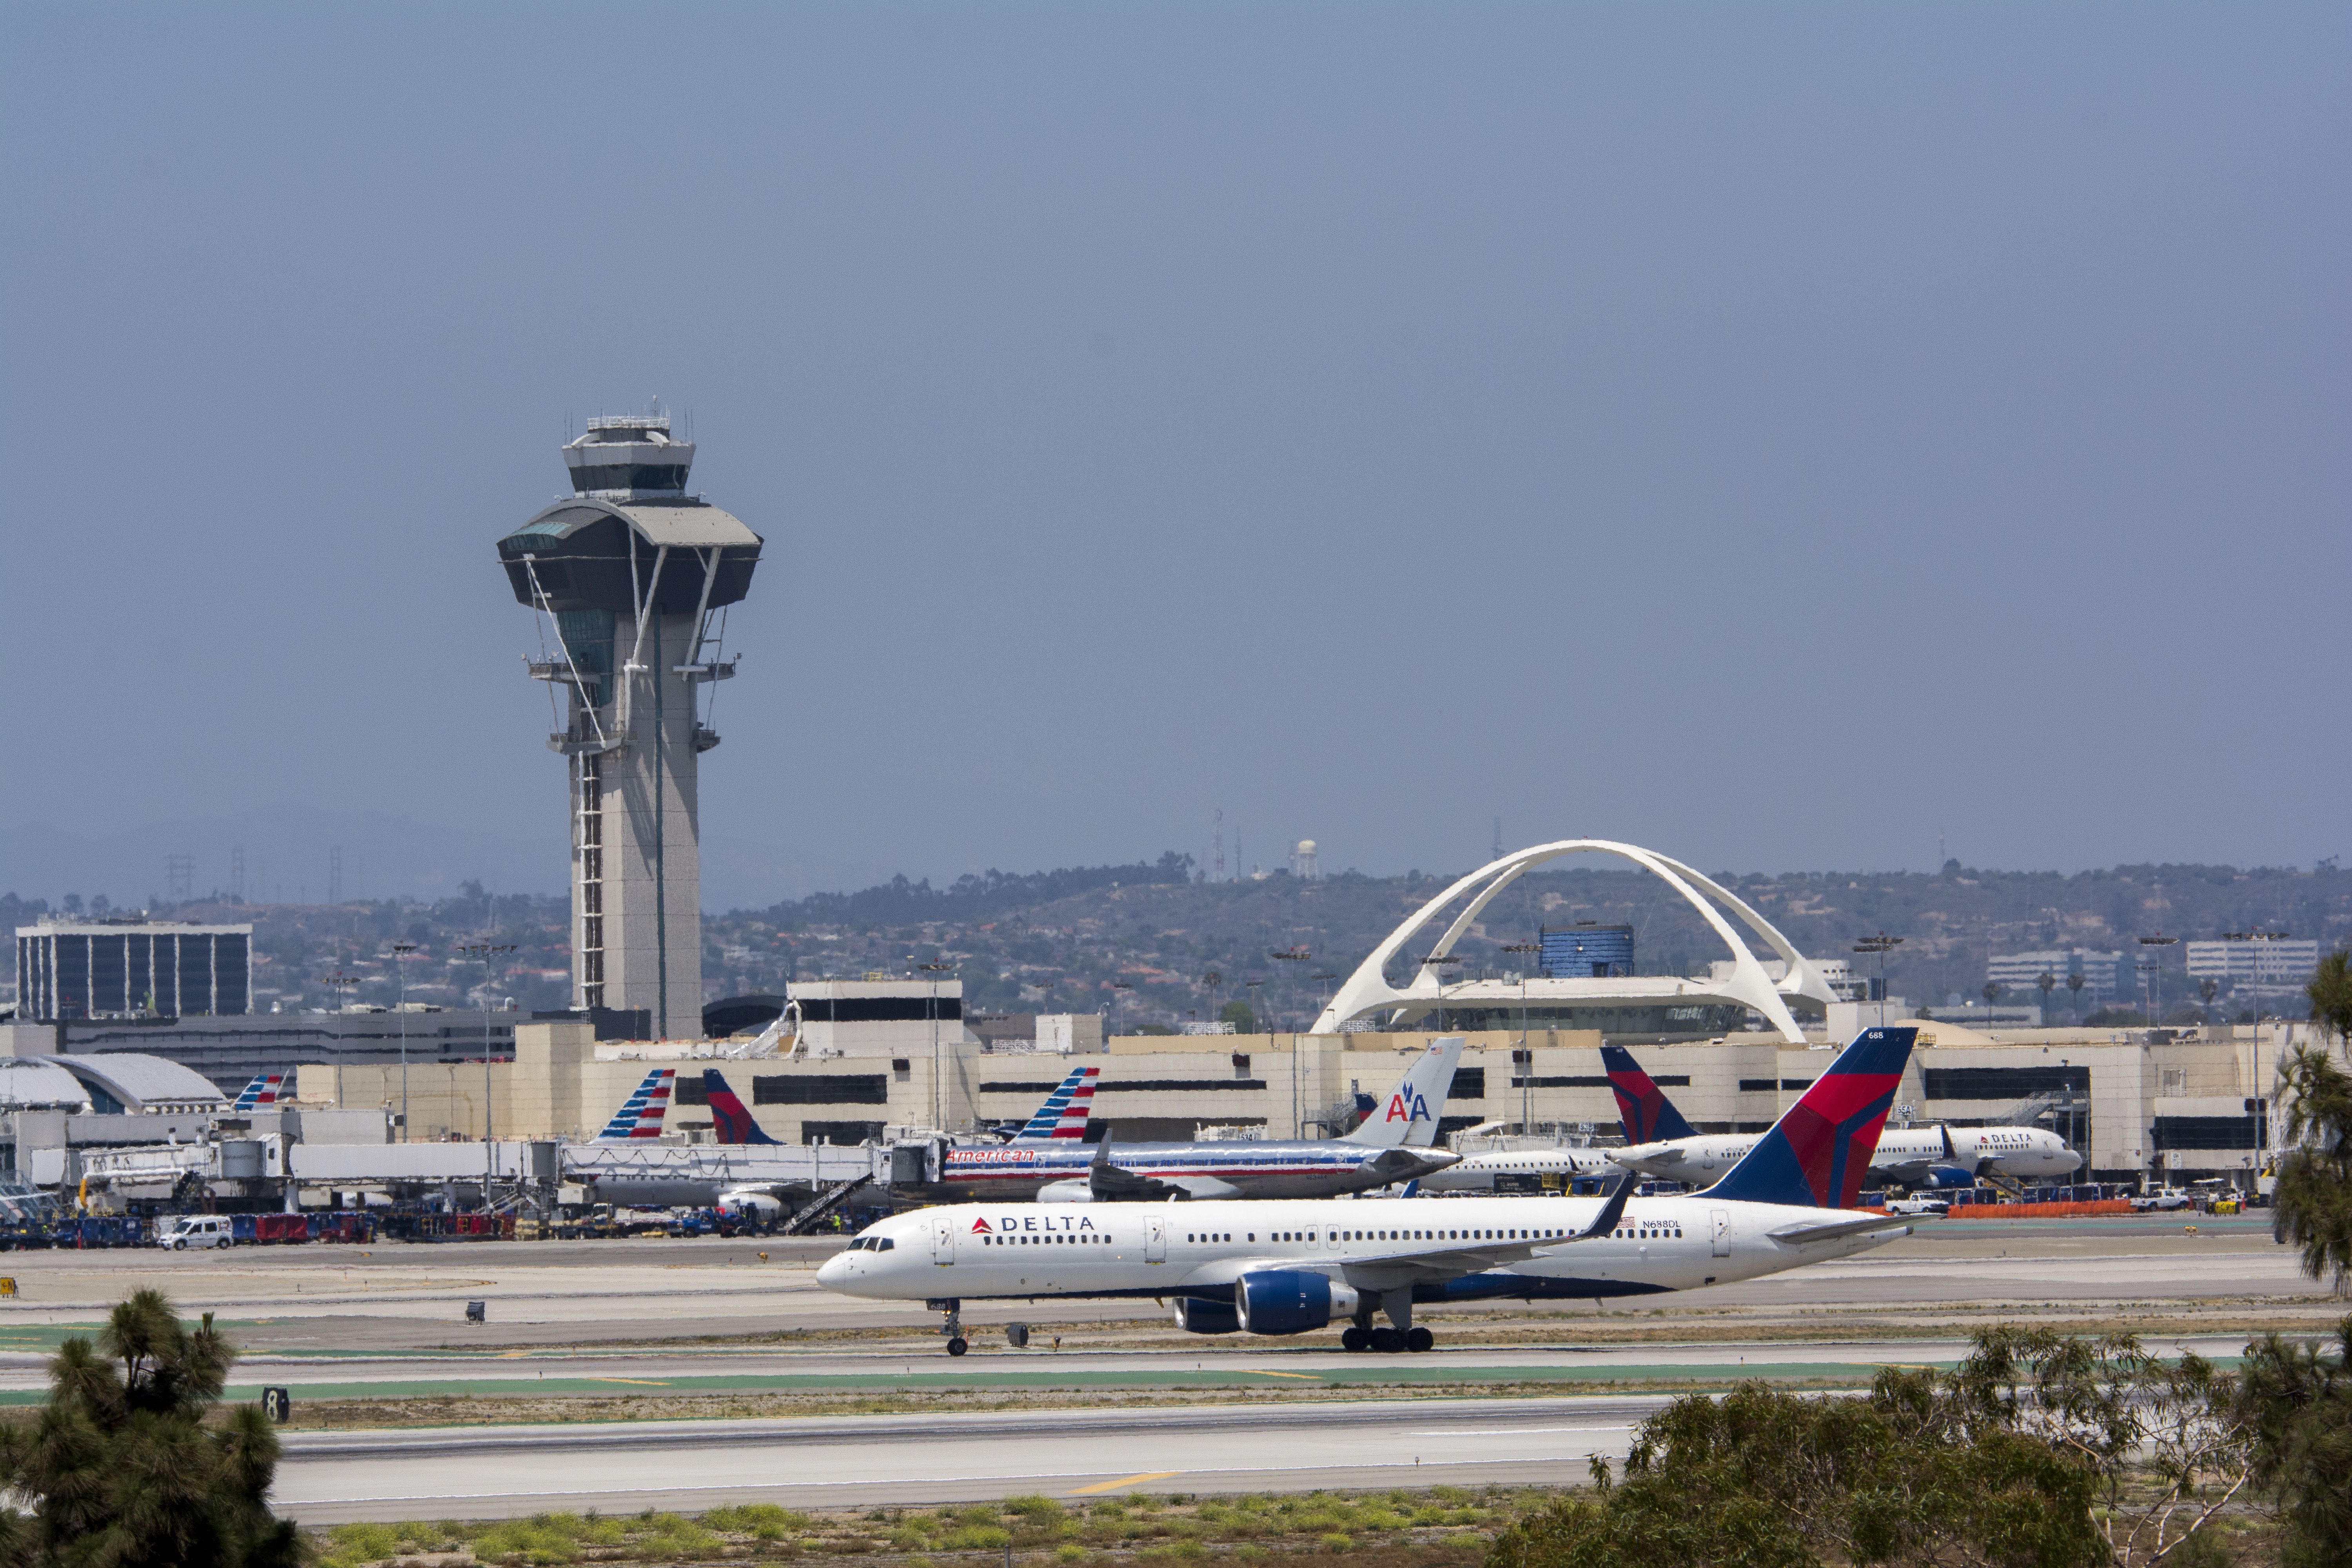 A Delta Air Lines Boeing 757 at LAX